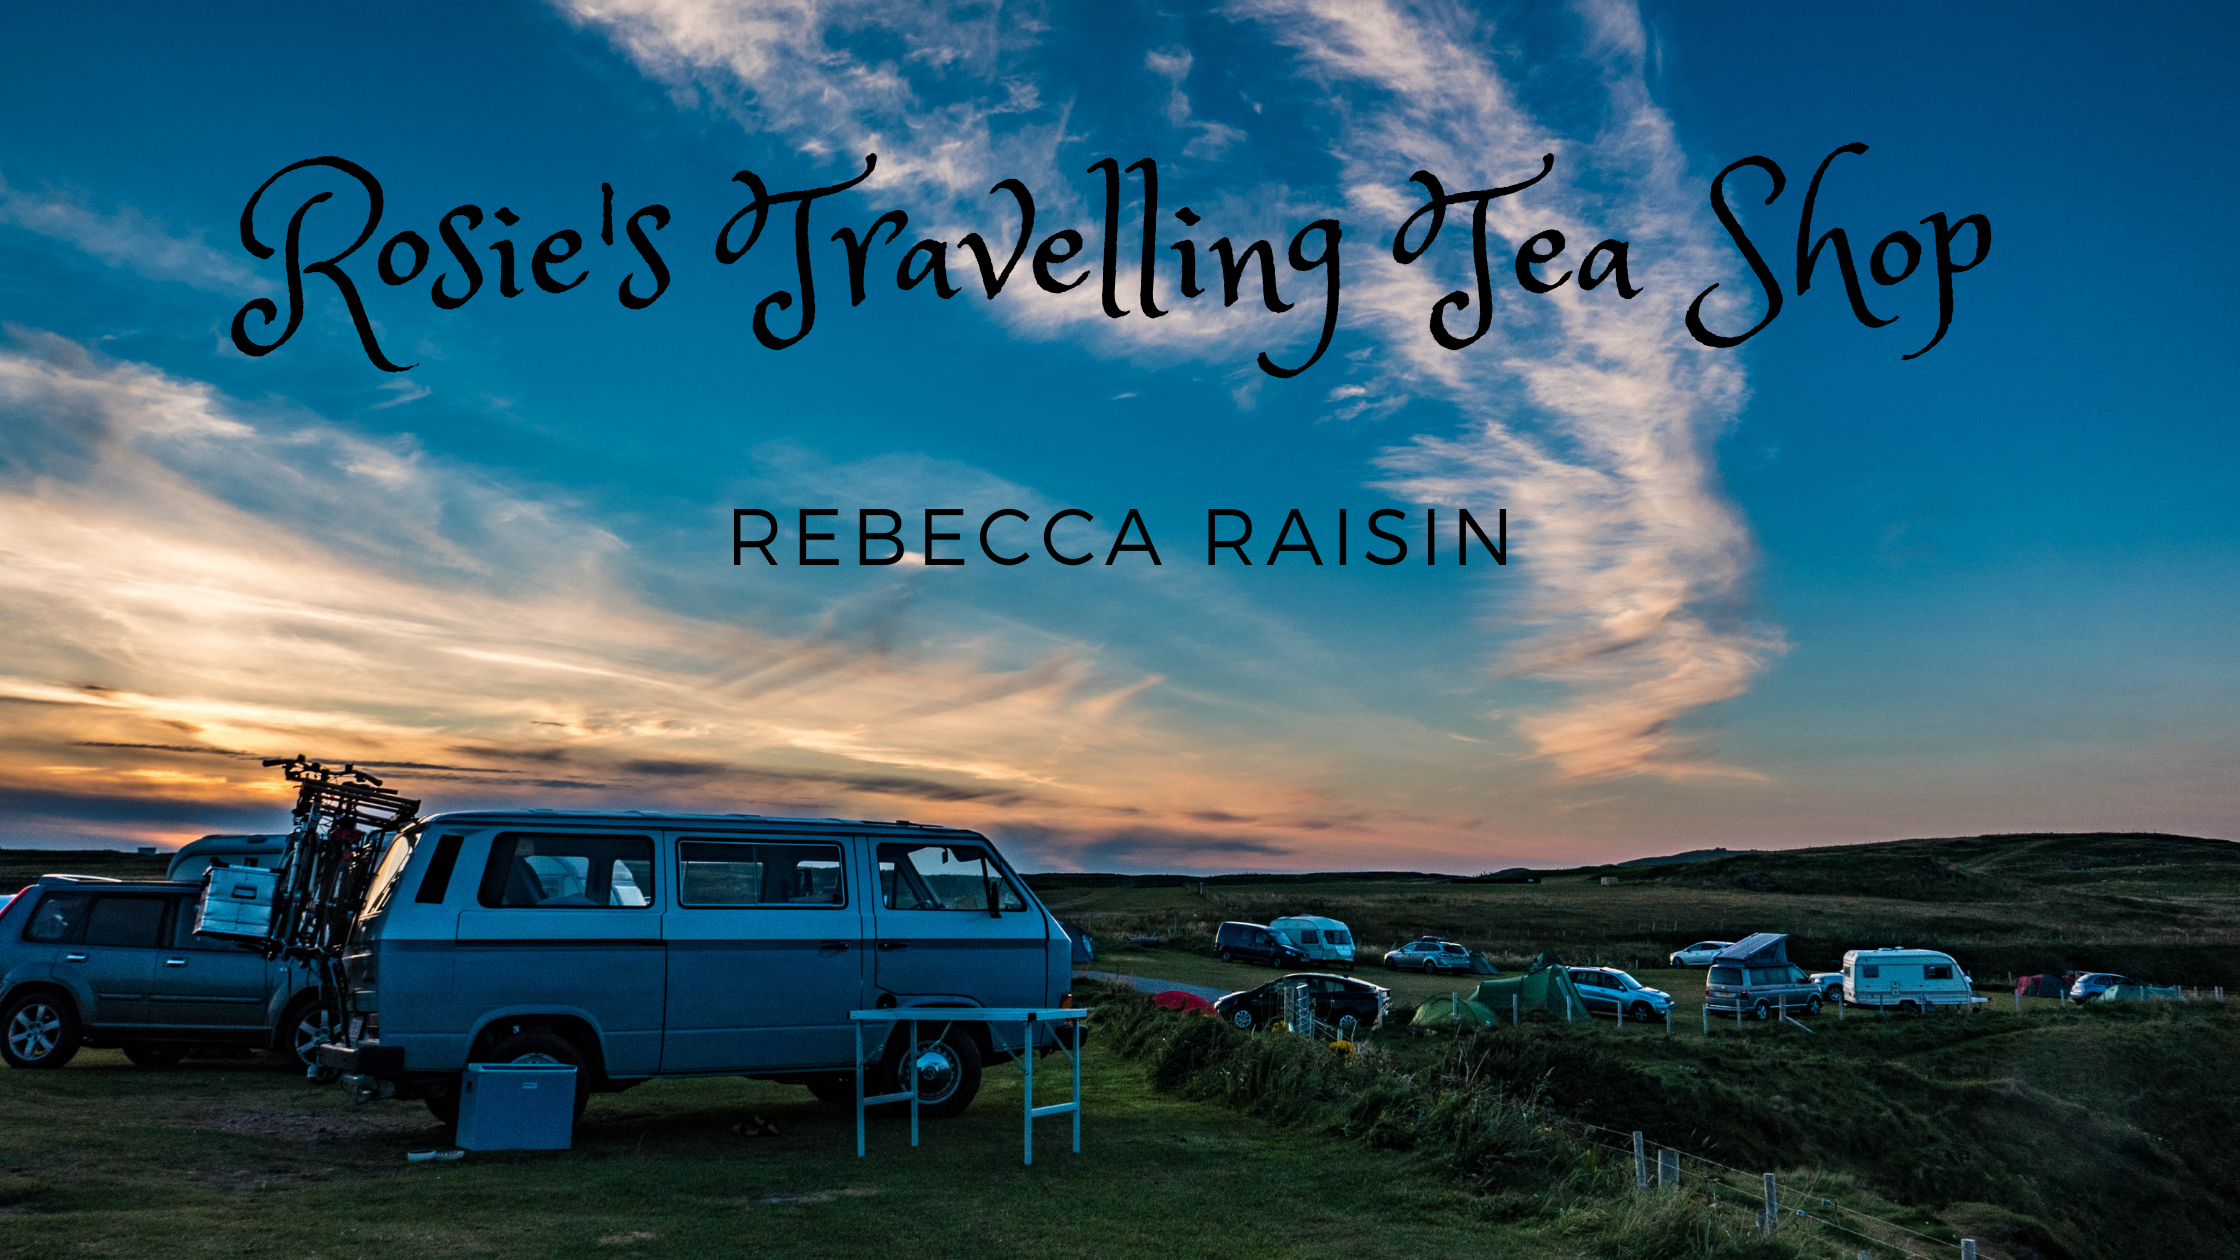 Book Review: Rosie’s Travelling Tea Shop by Rebecca Raisin